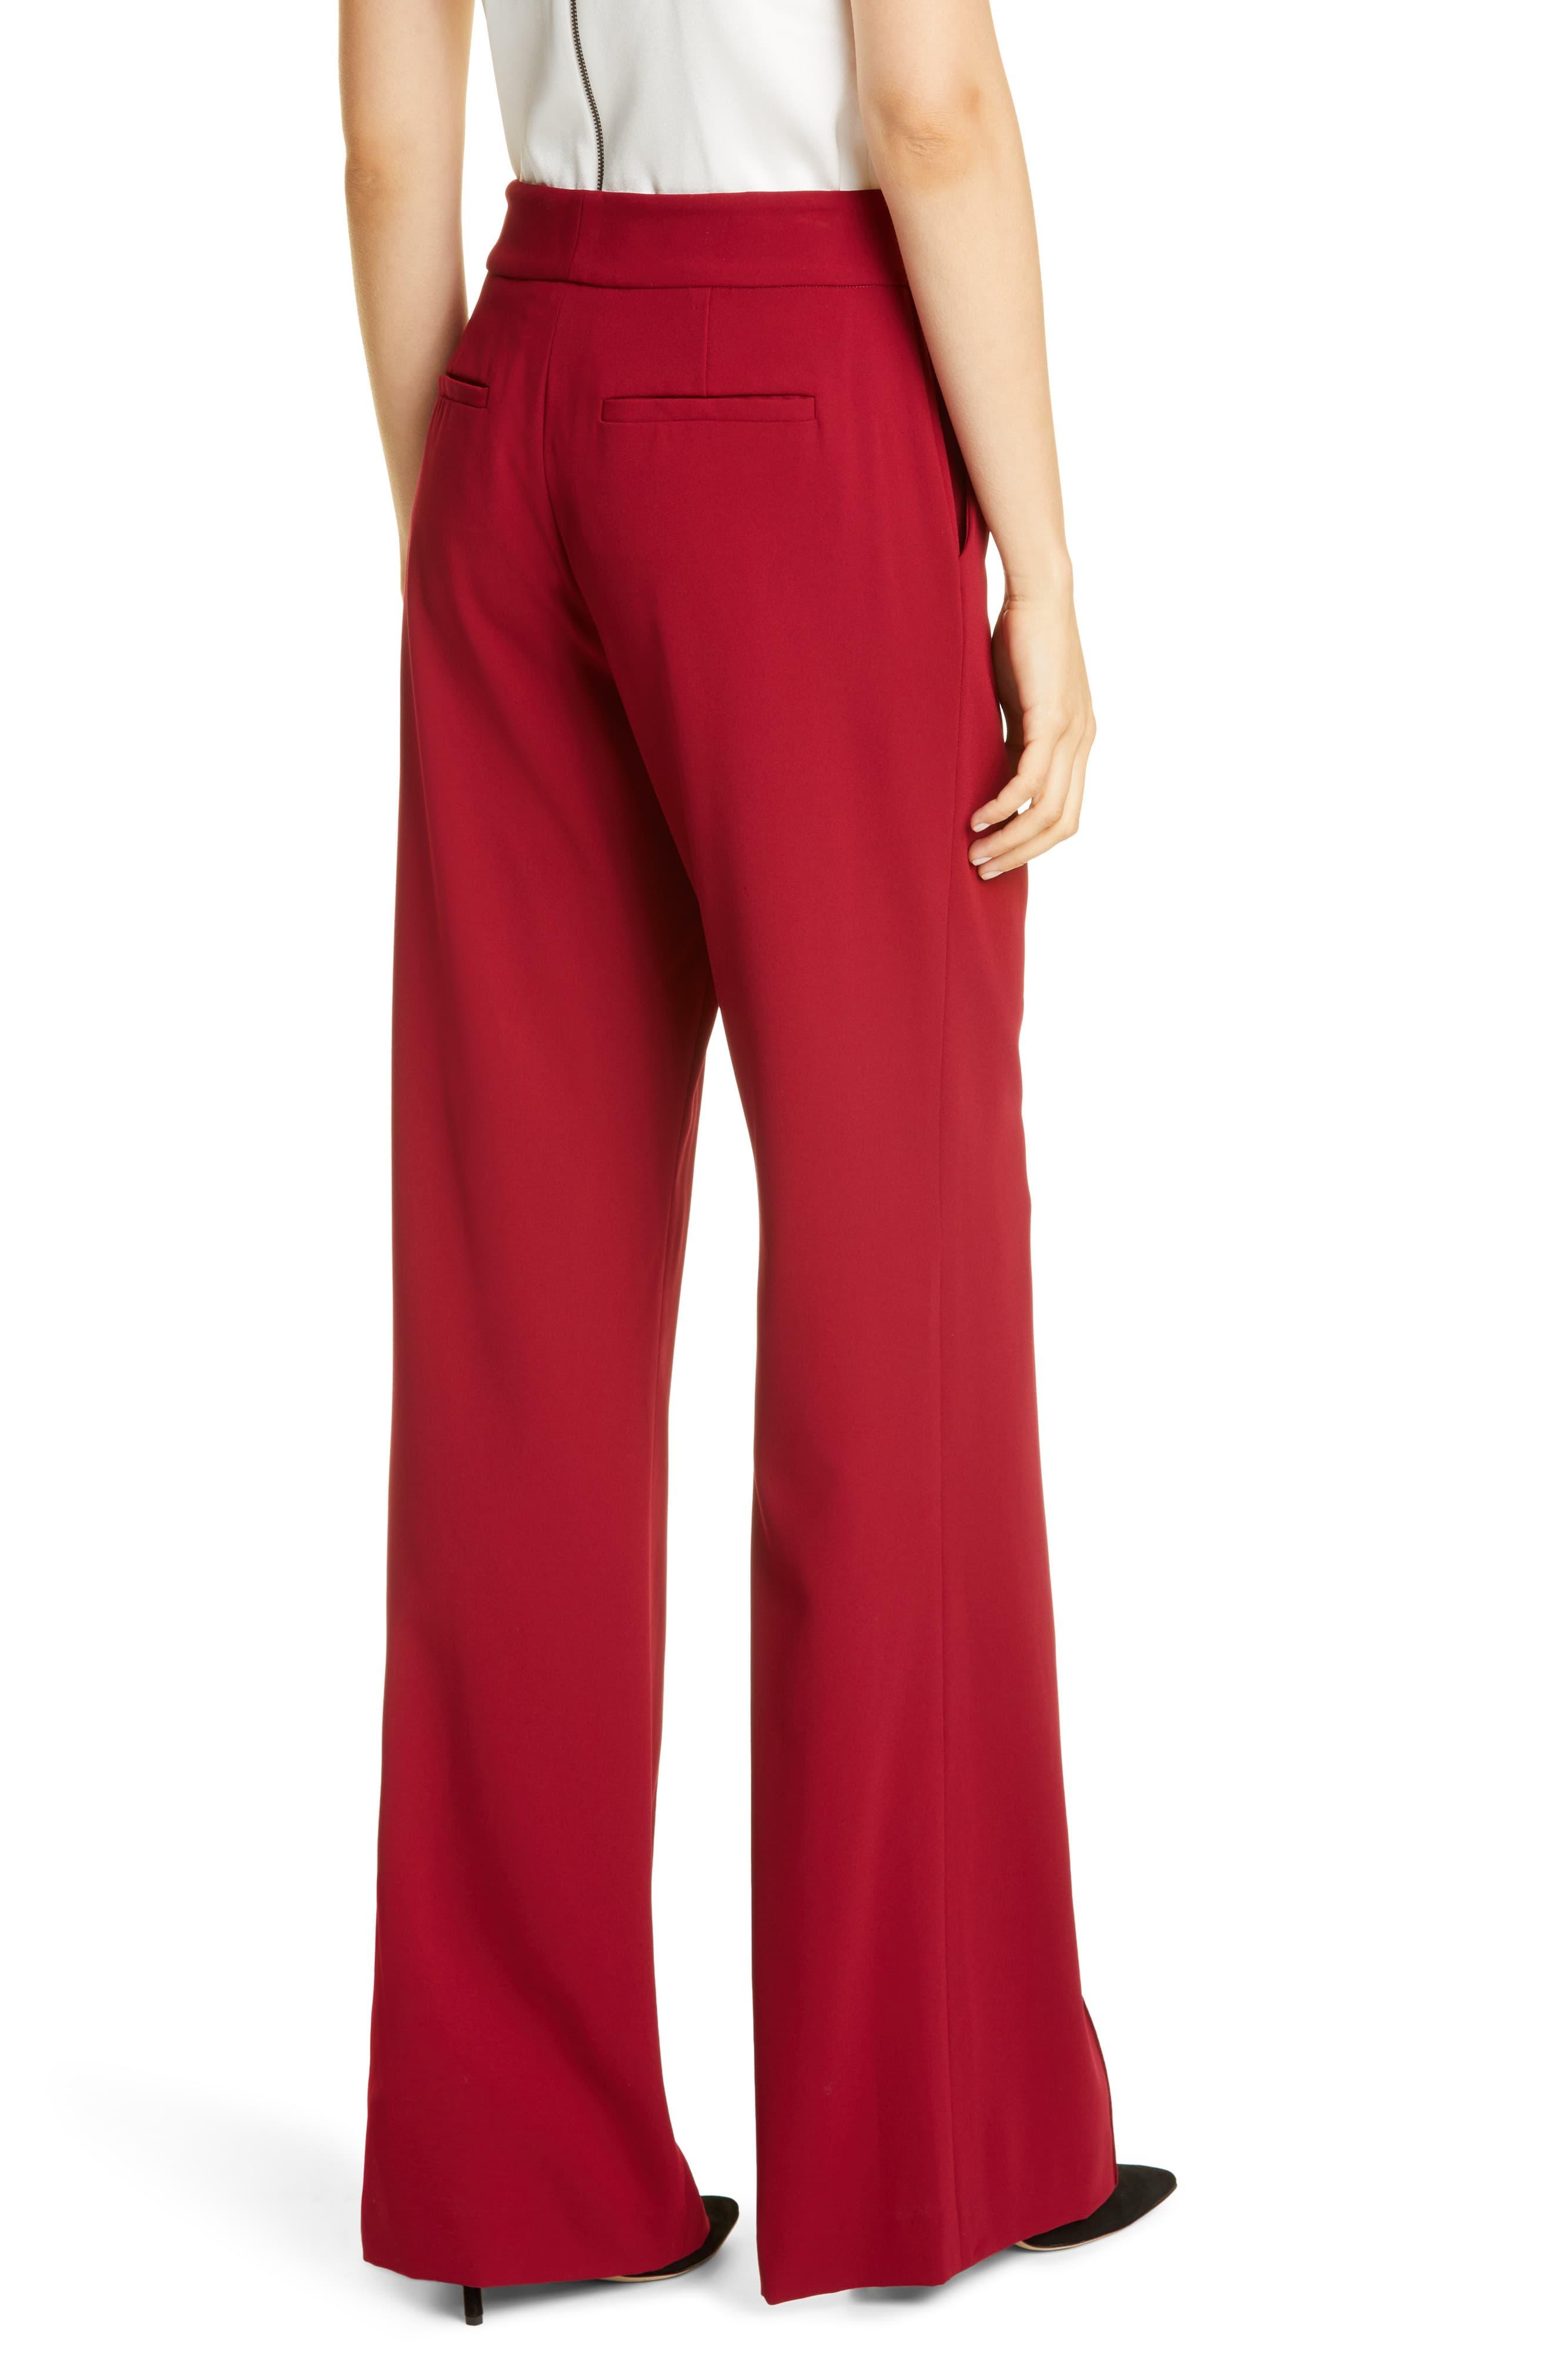 Alice + Olivia Dylan High Waist Wide Leg Pants in Bordeaux (Red) - Lyst